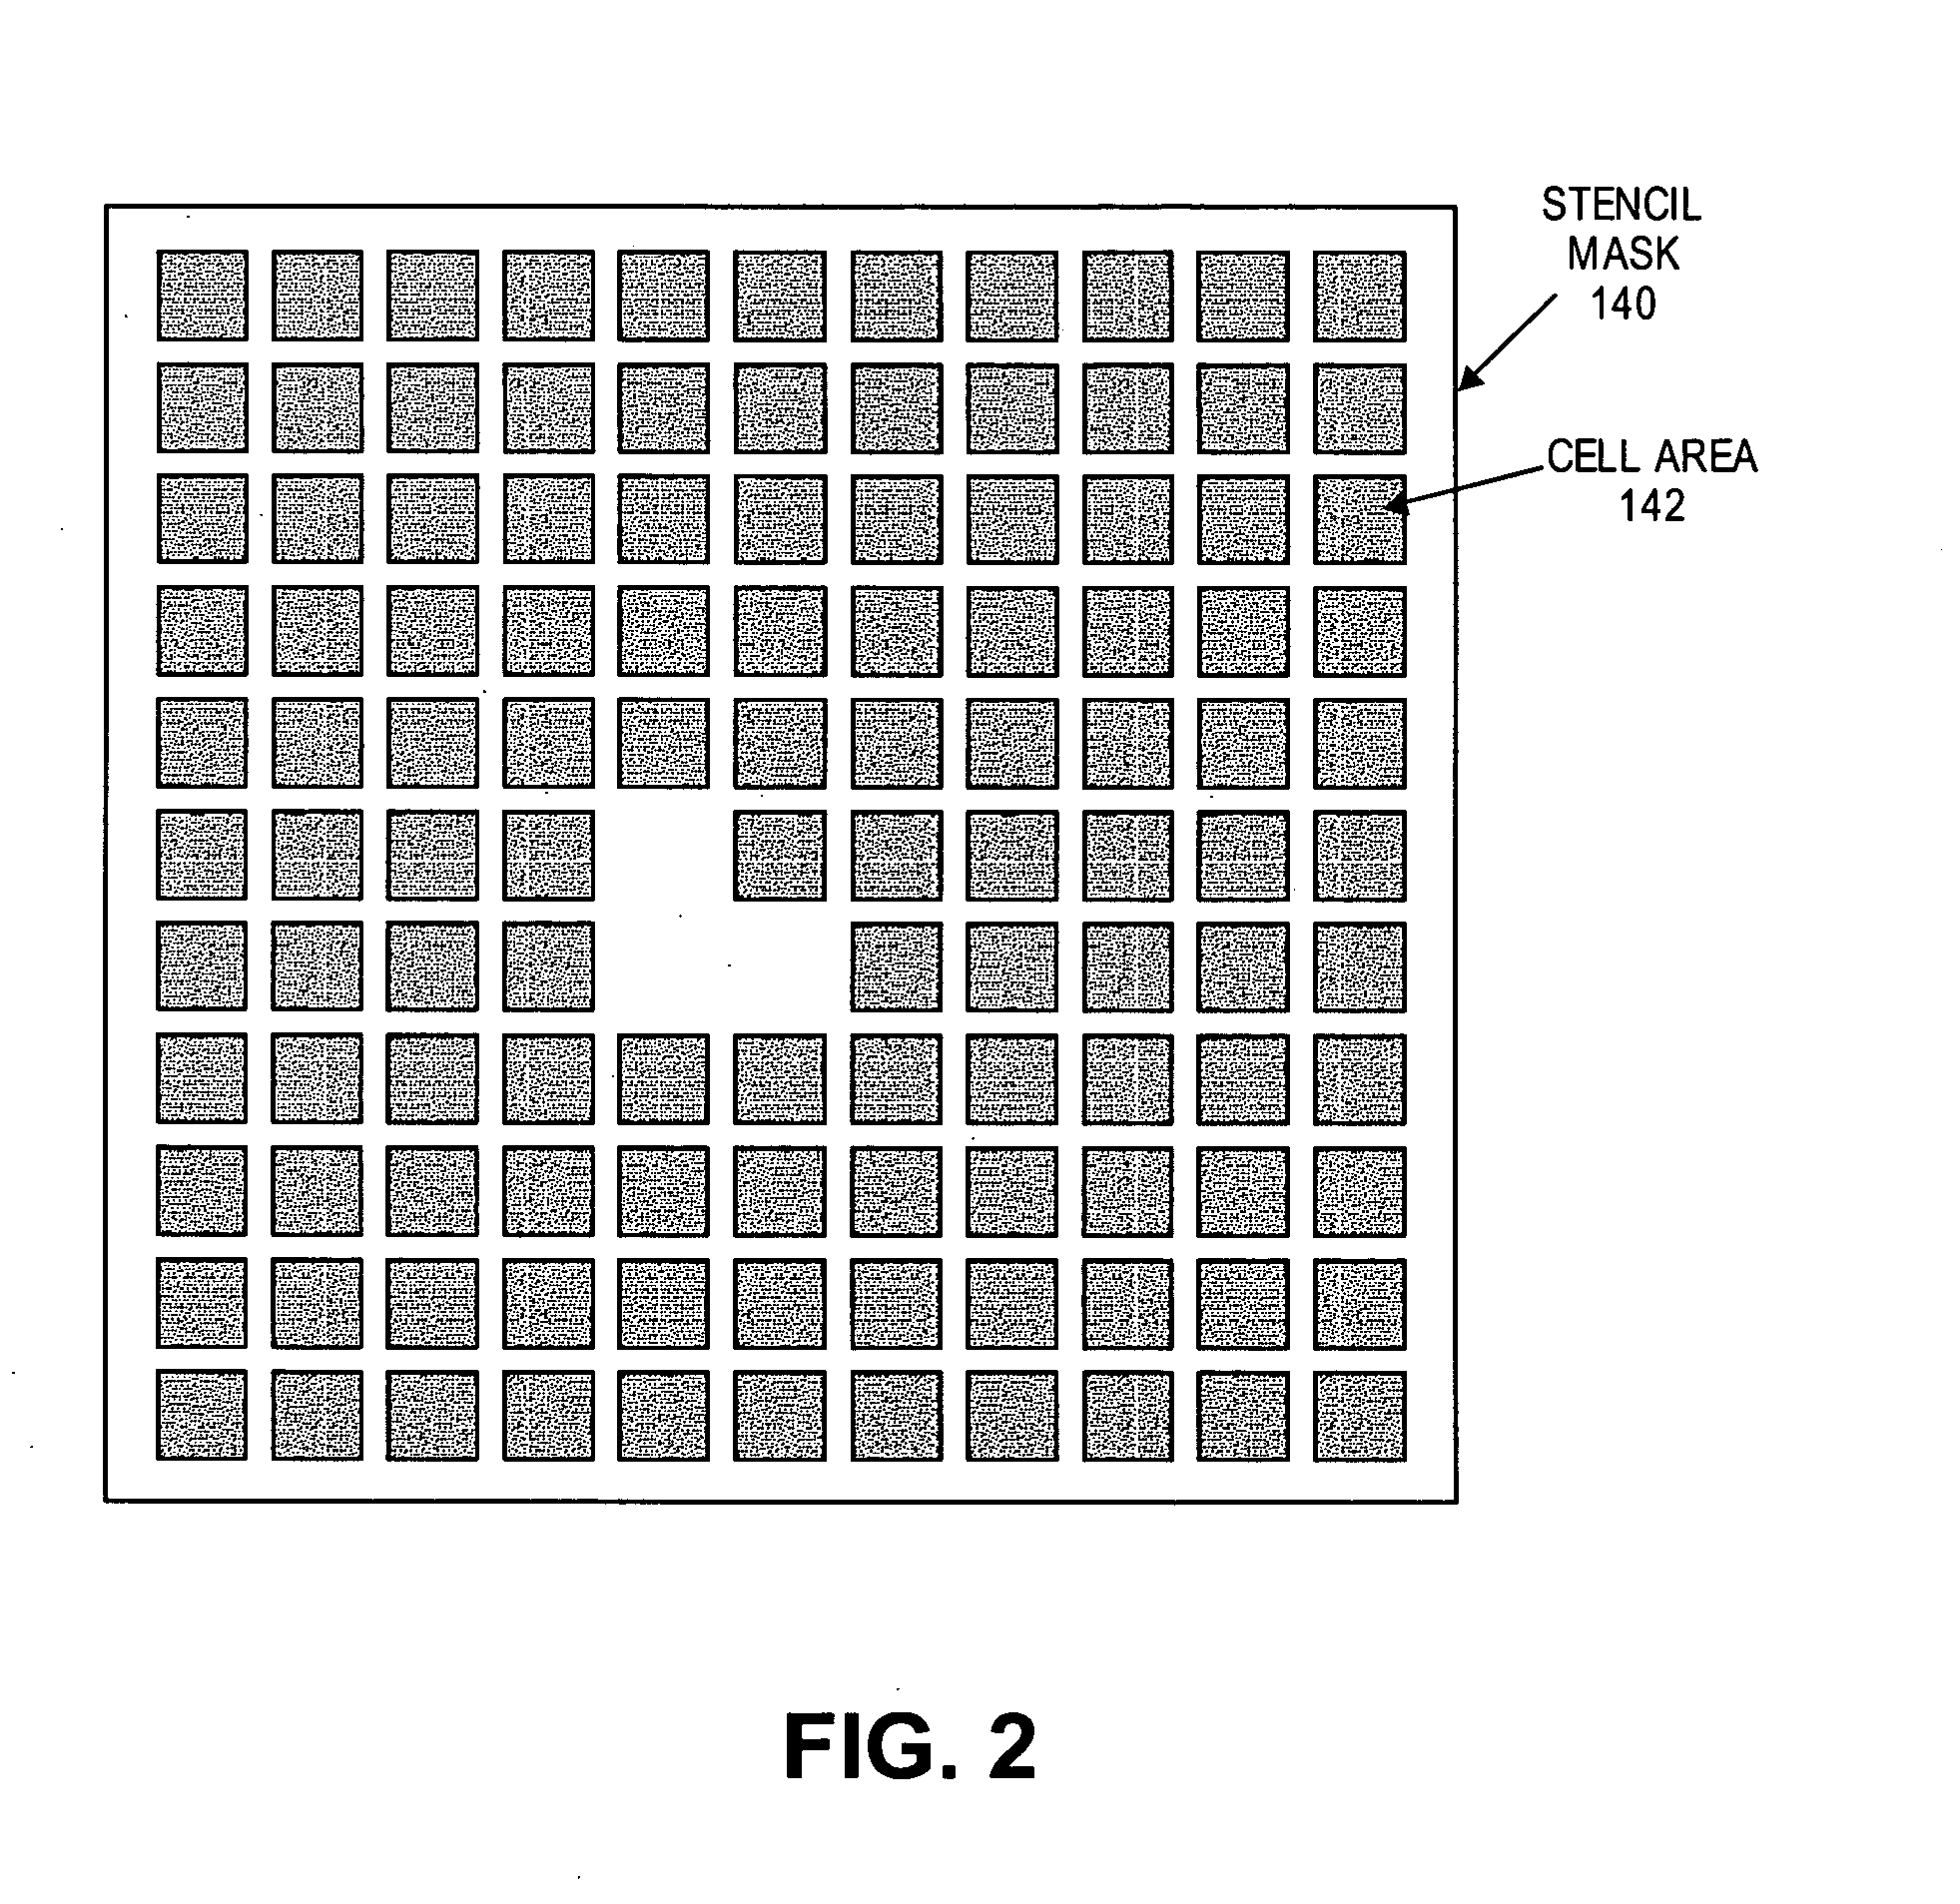 Stencil design and method for cell projection particle beam lithography